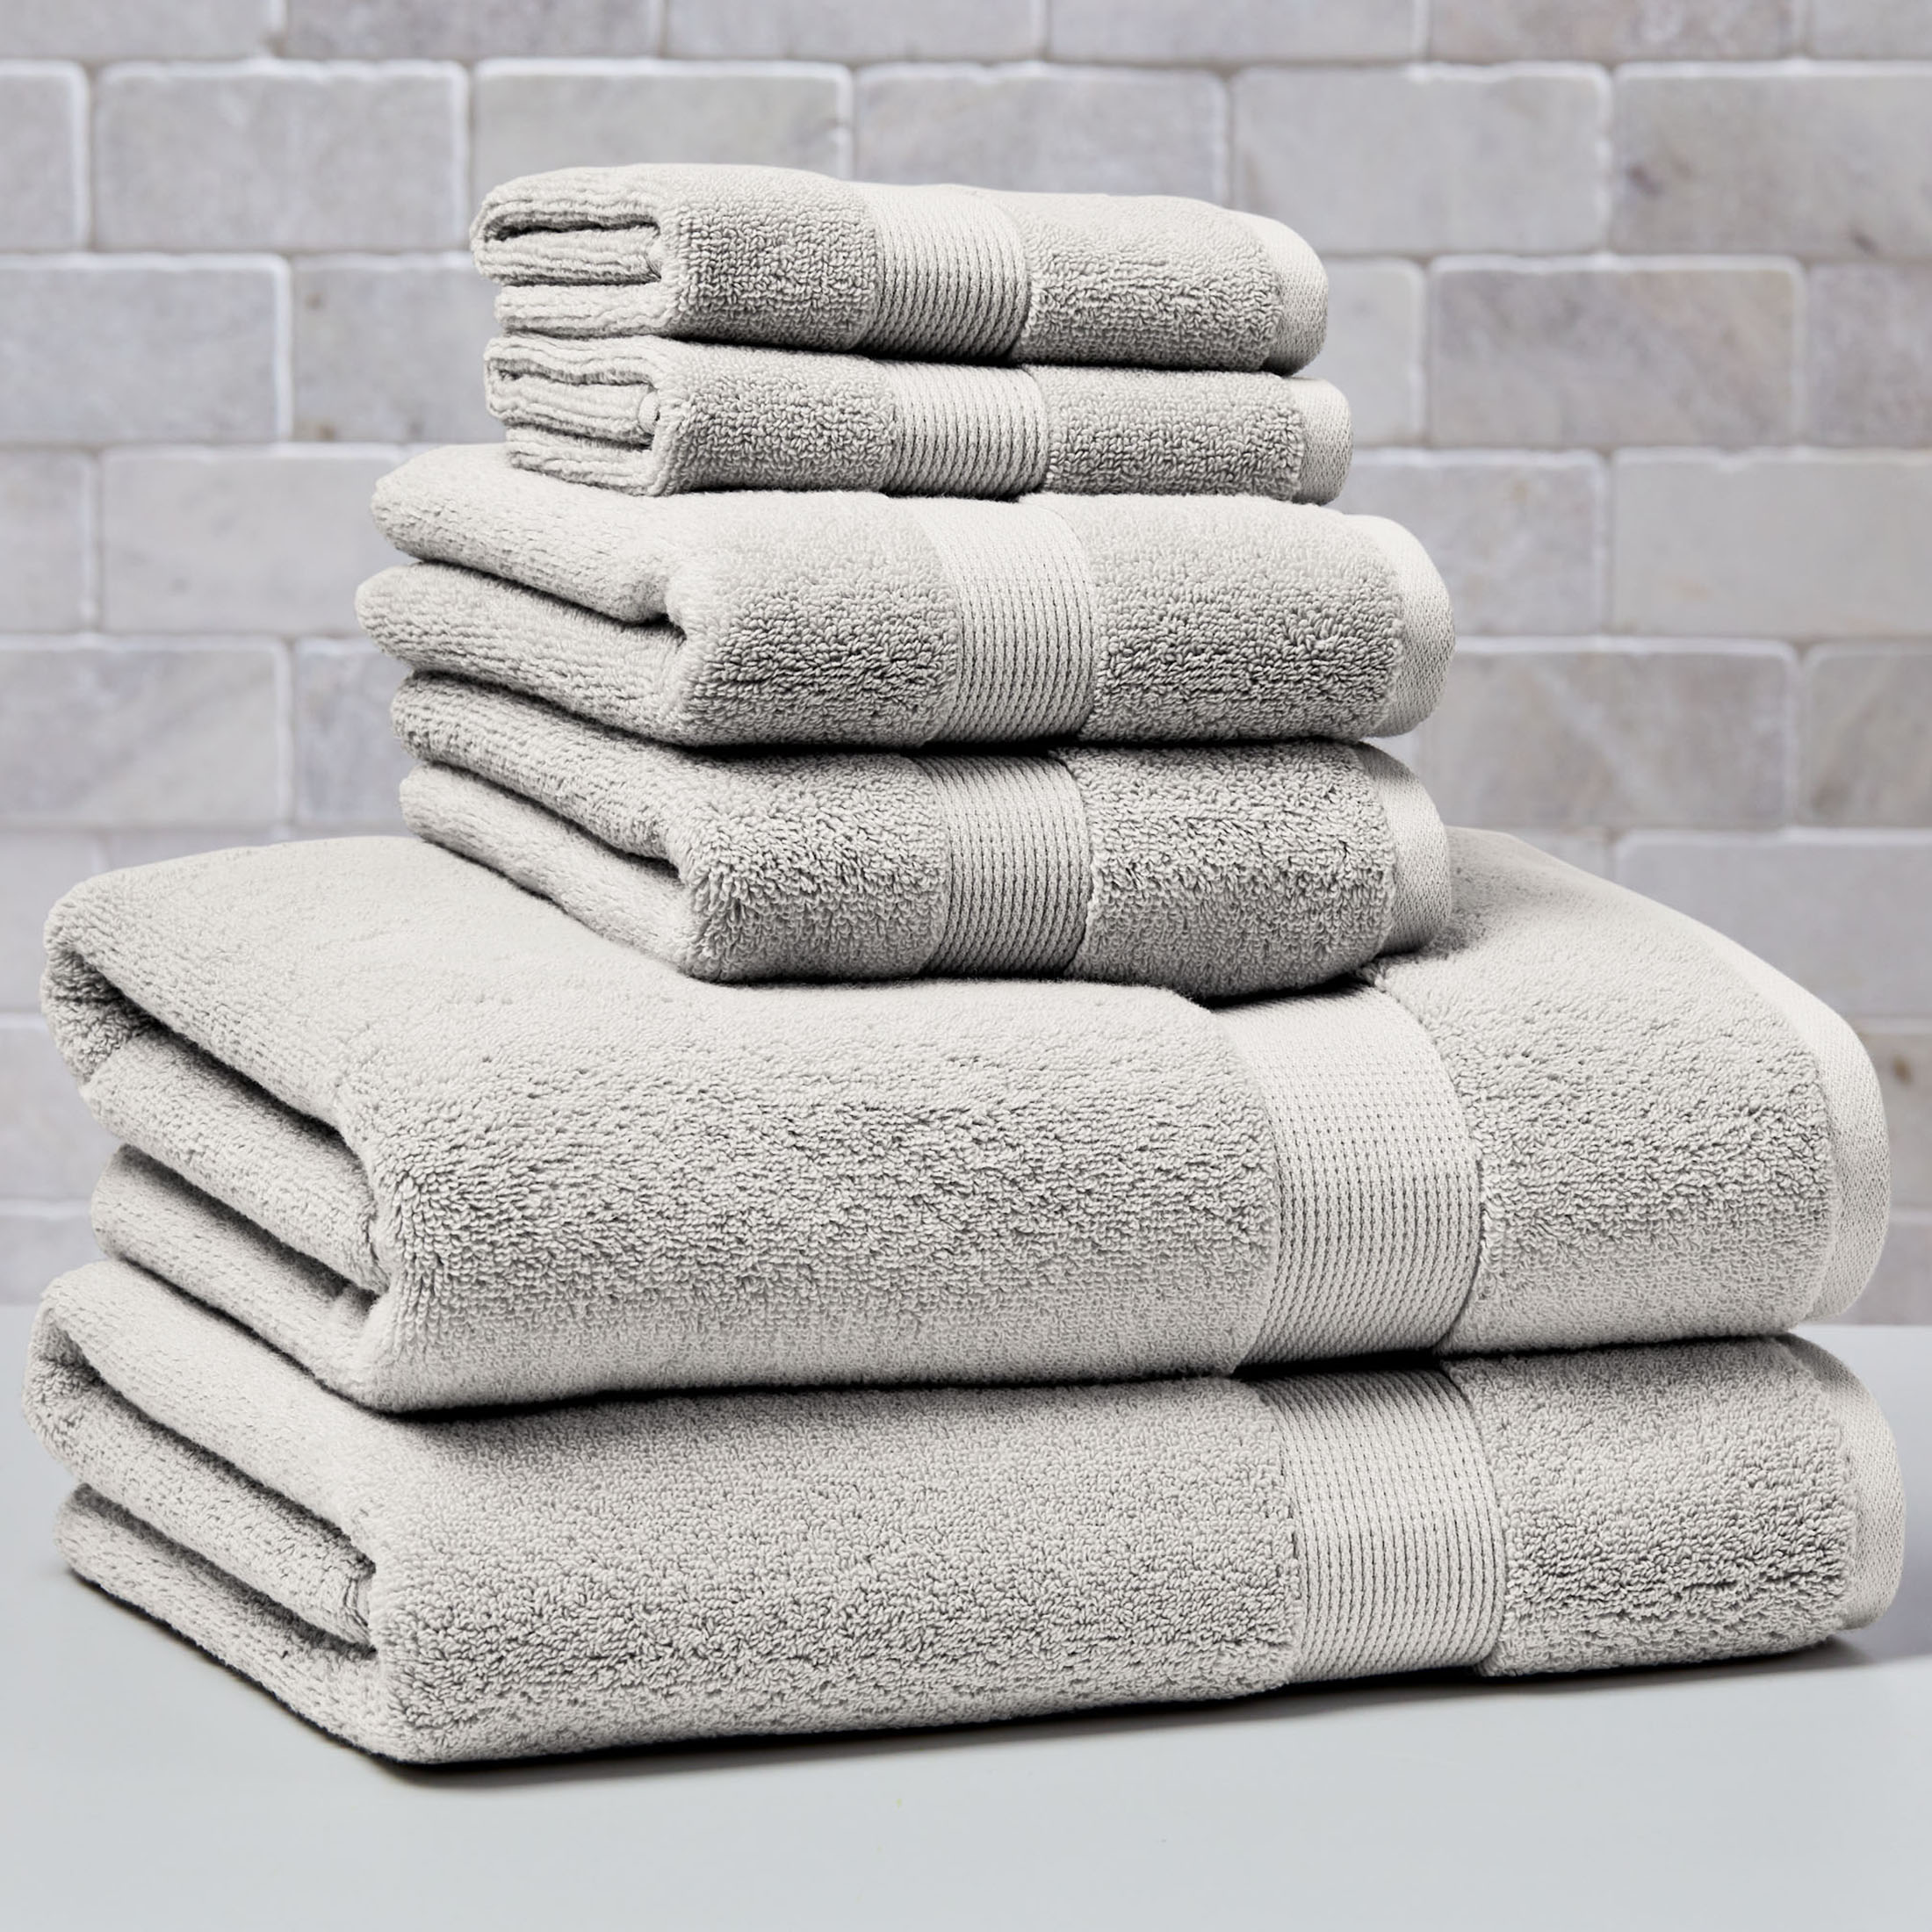 Better Homes & Gardens Signature Soft Hand Towel, Soft Silver - image 5 of 6